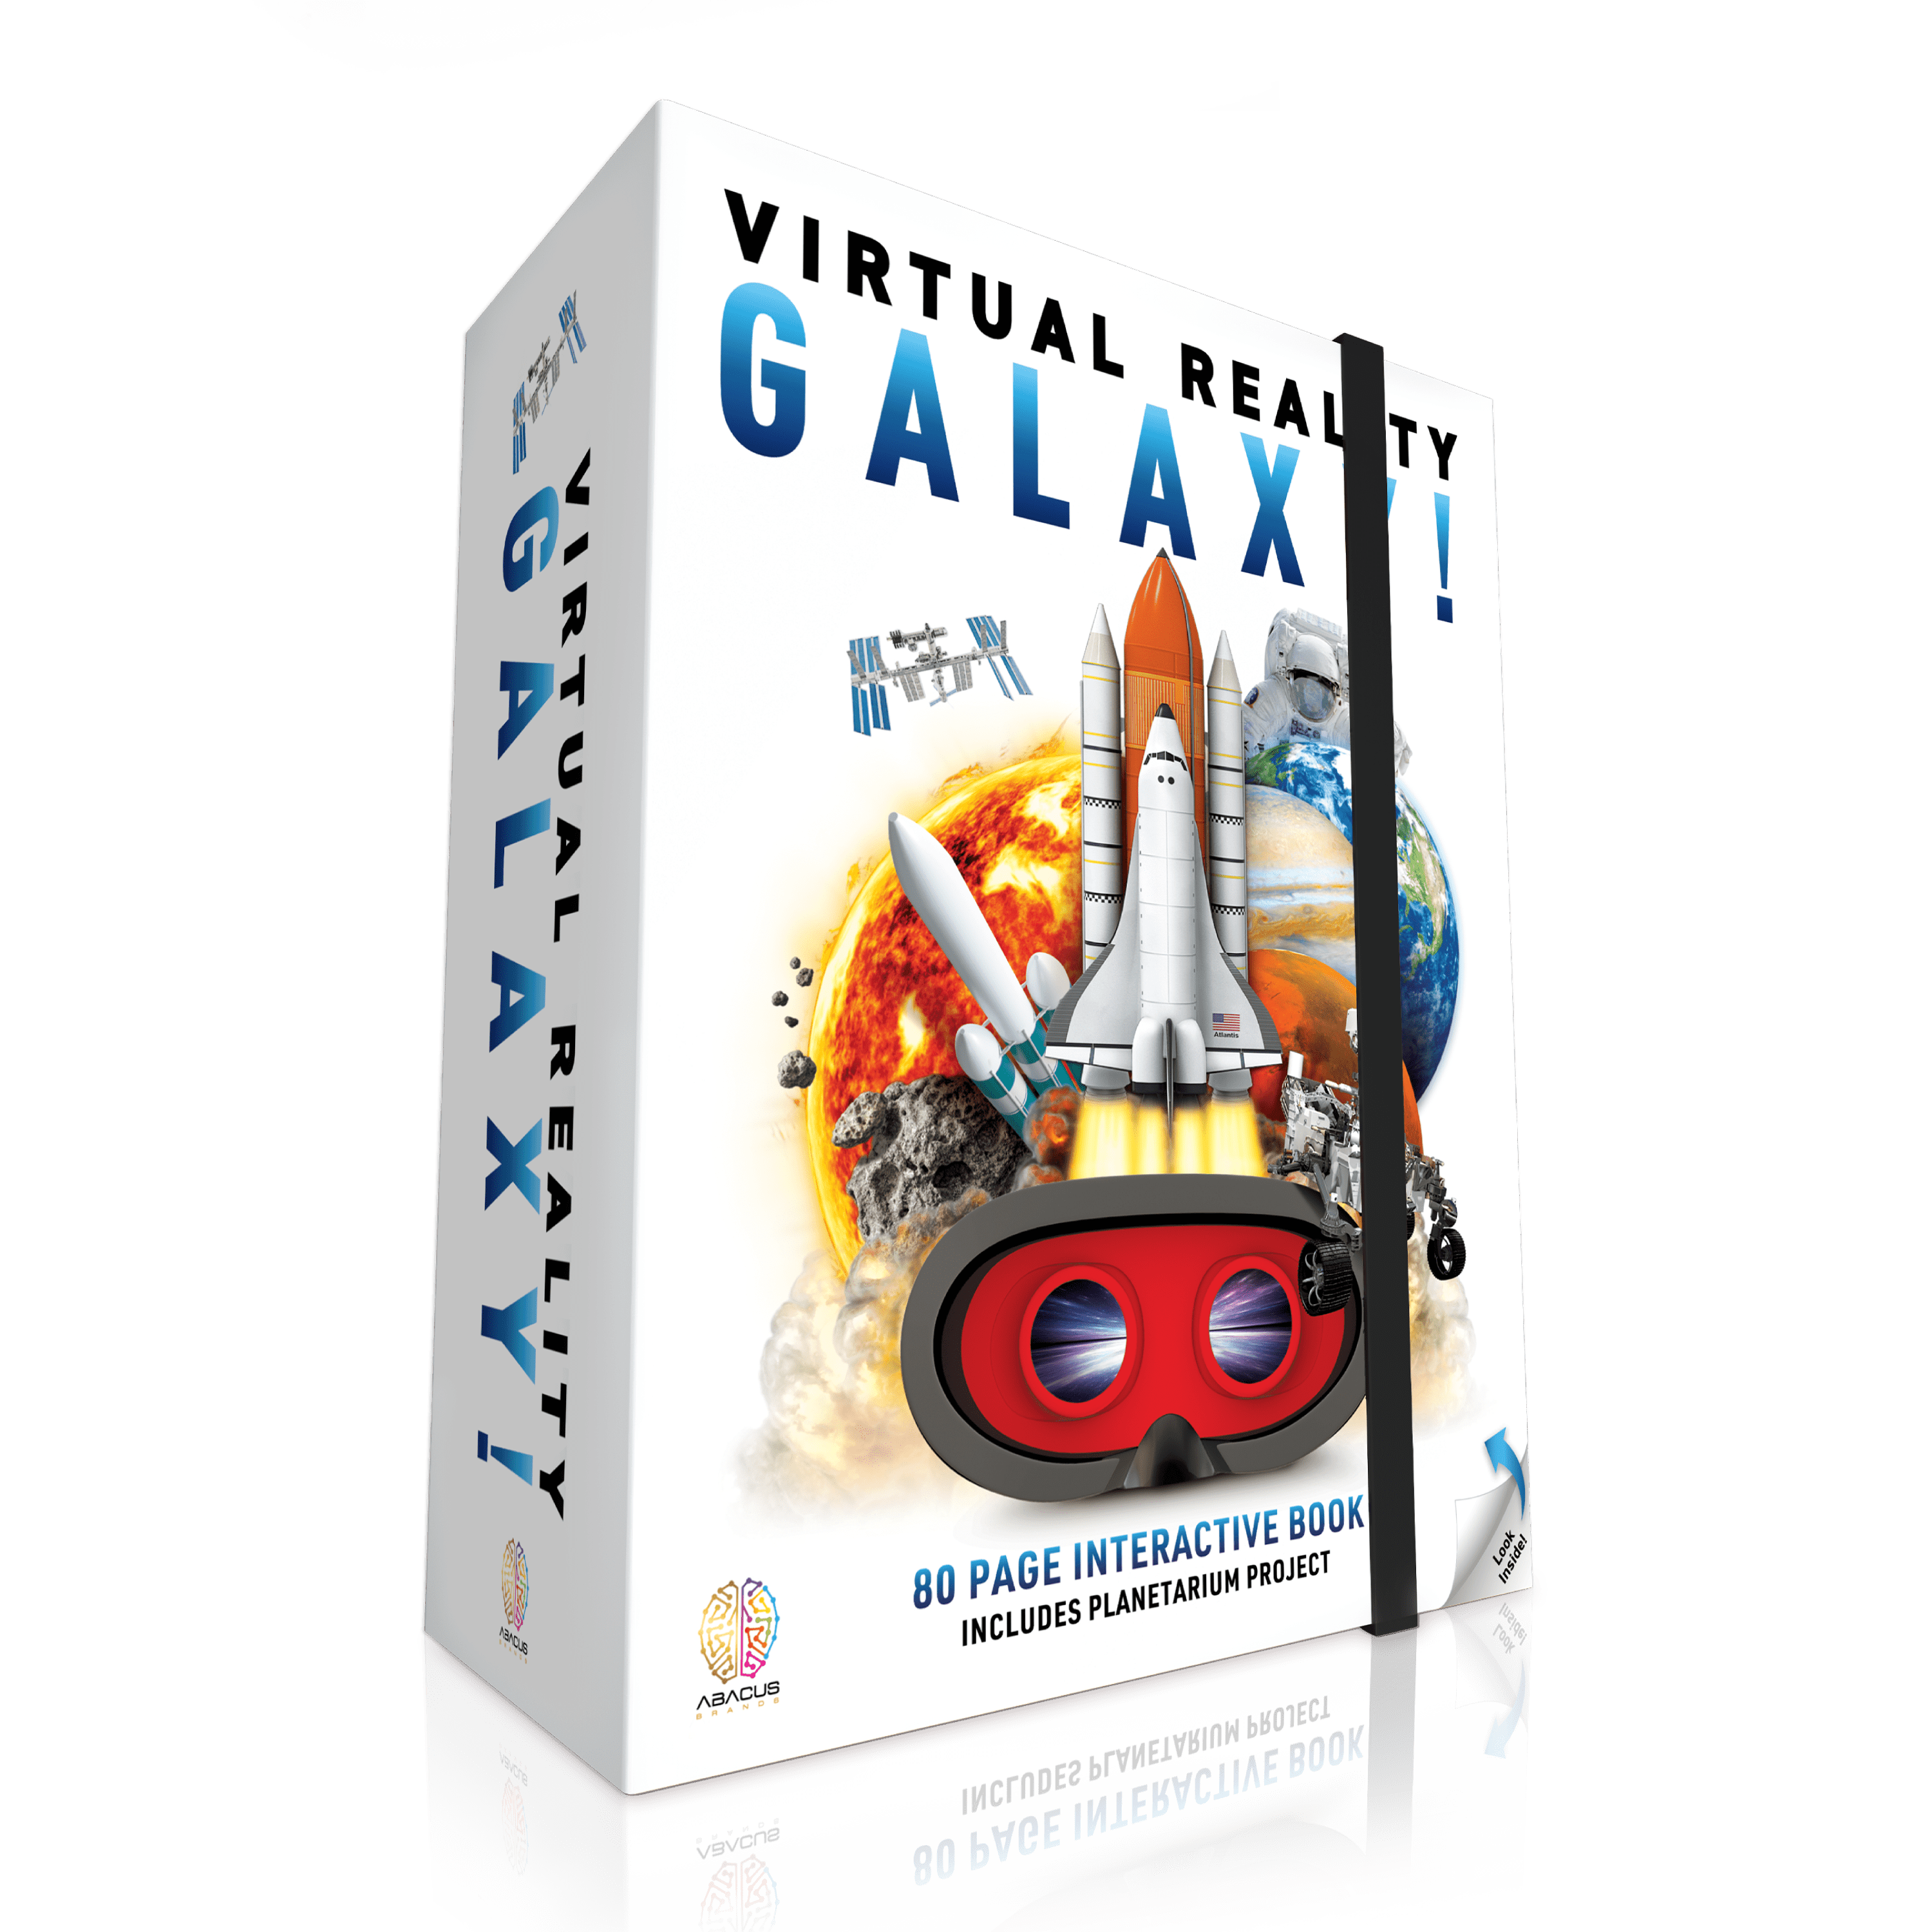 Deluxe Virtual Reality Gift Set - Galaxy!